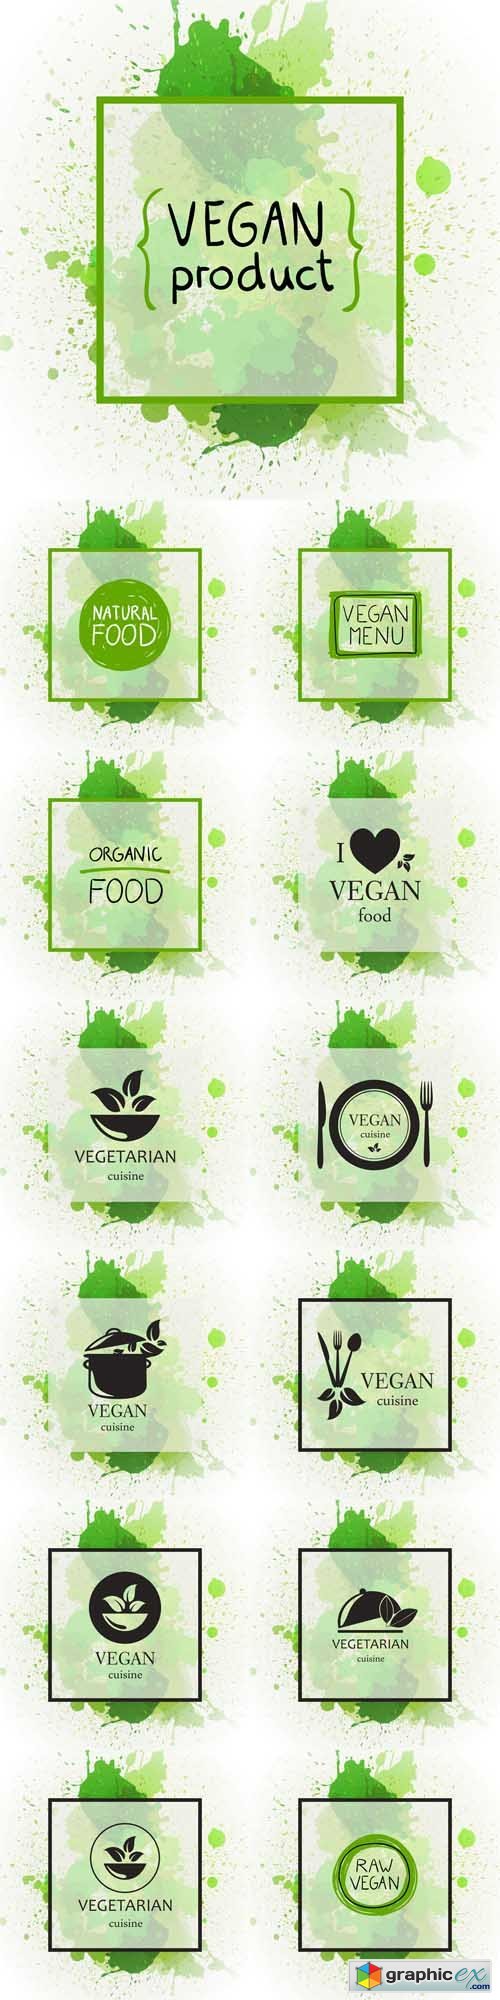 Vegan Banners on a Vintage Background